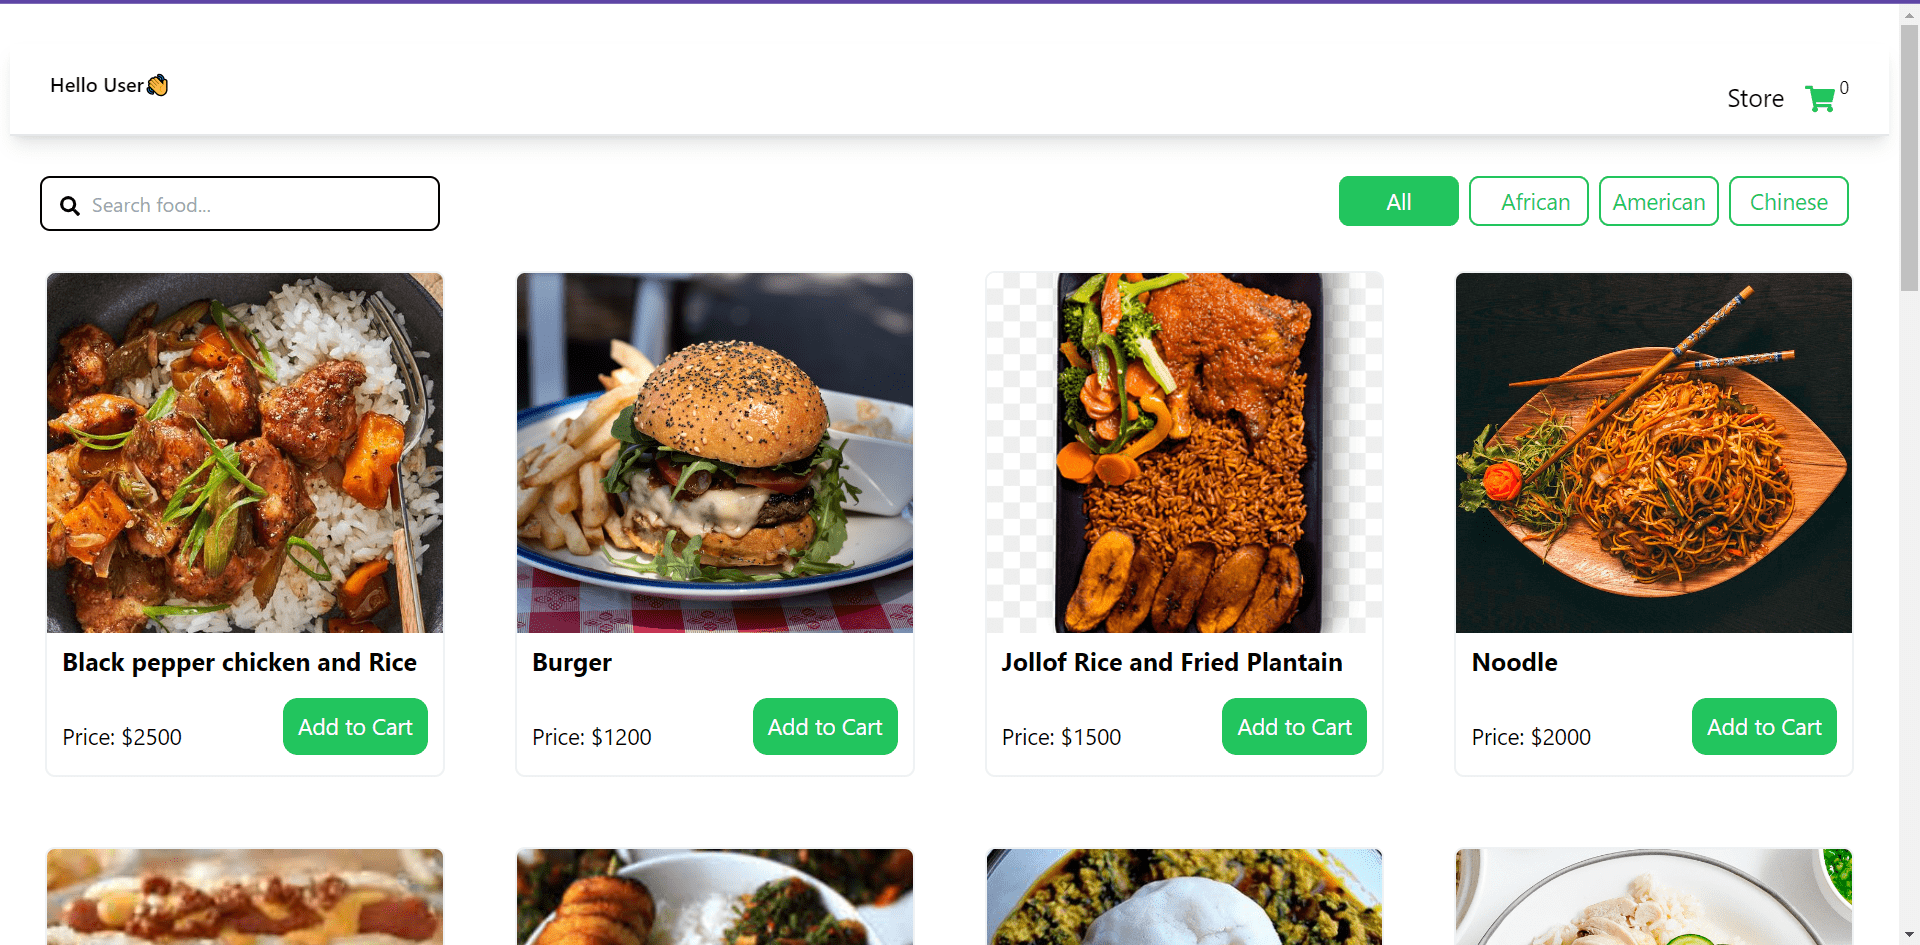 menu/home page of the app